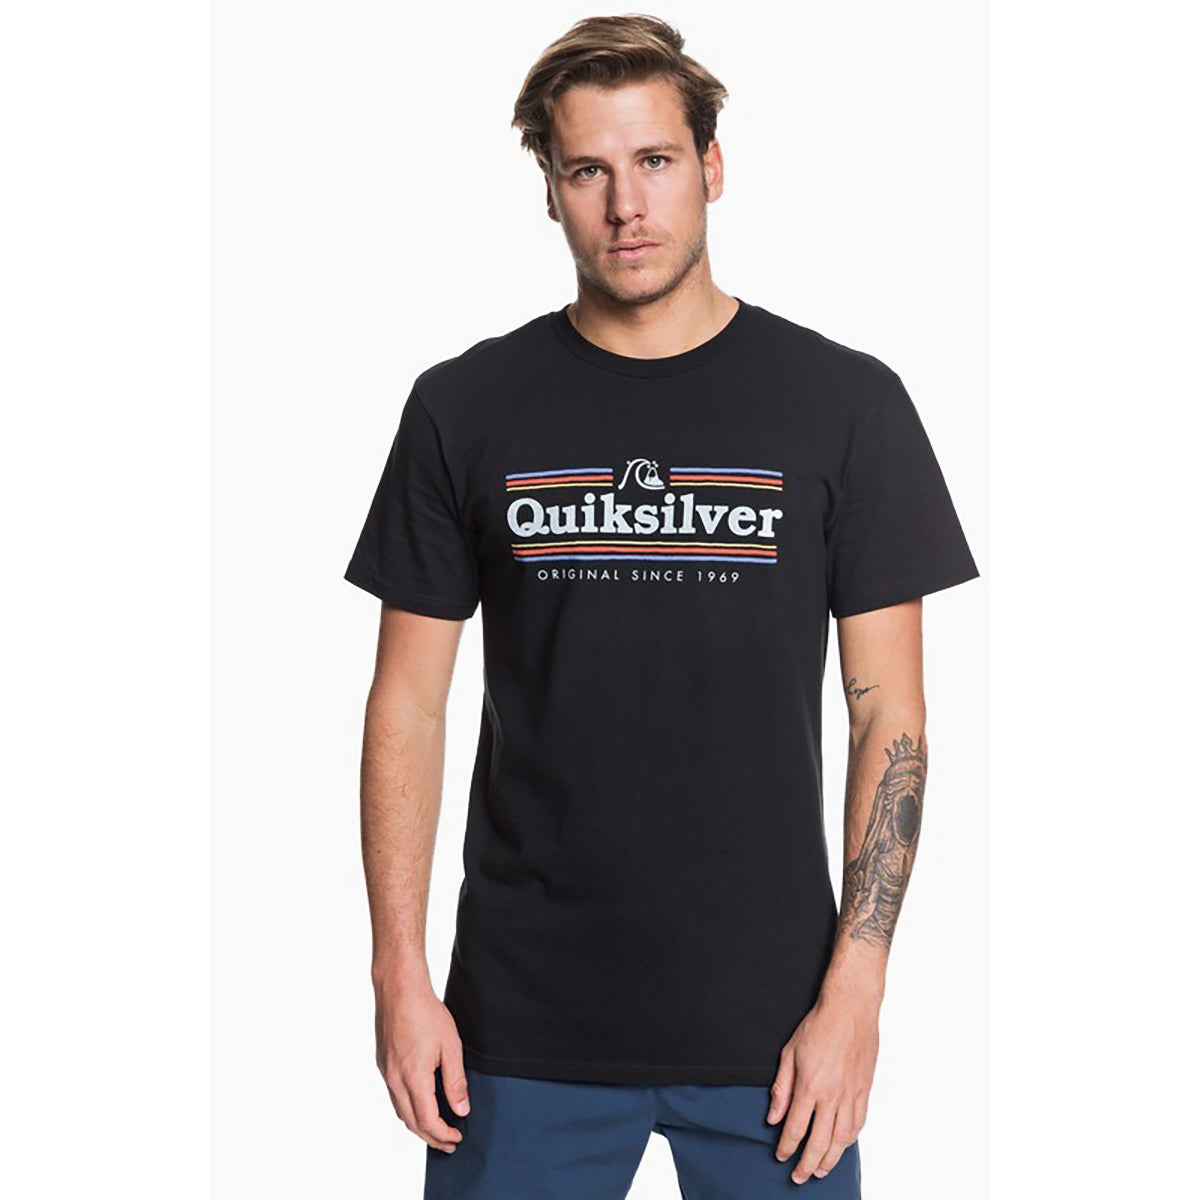 Get (Brand Sports | Shirts – New) Short-Sleeve Action Buzzy Quiksilver Haustrom.com Mens Shop